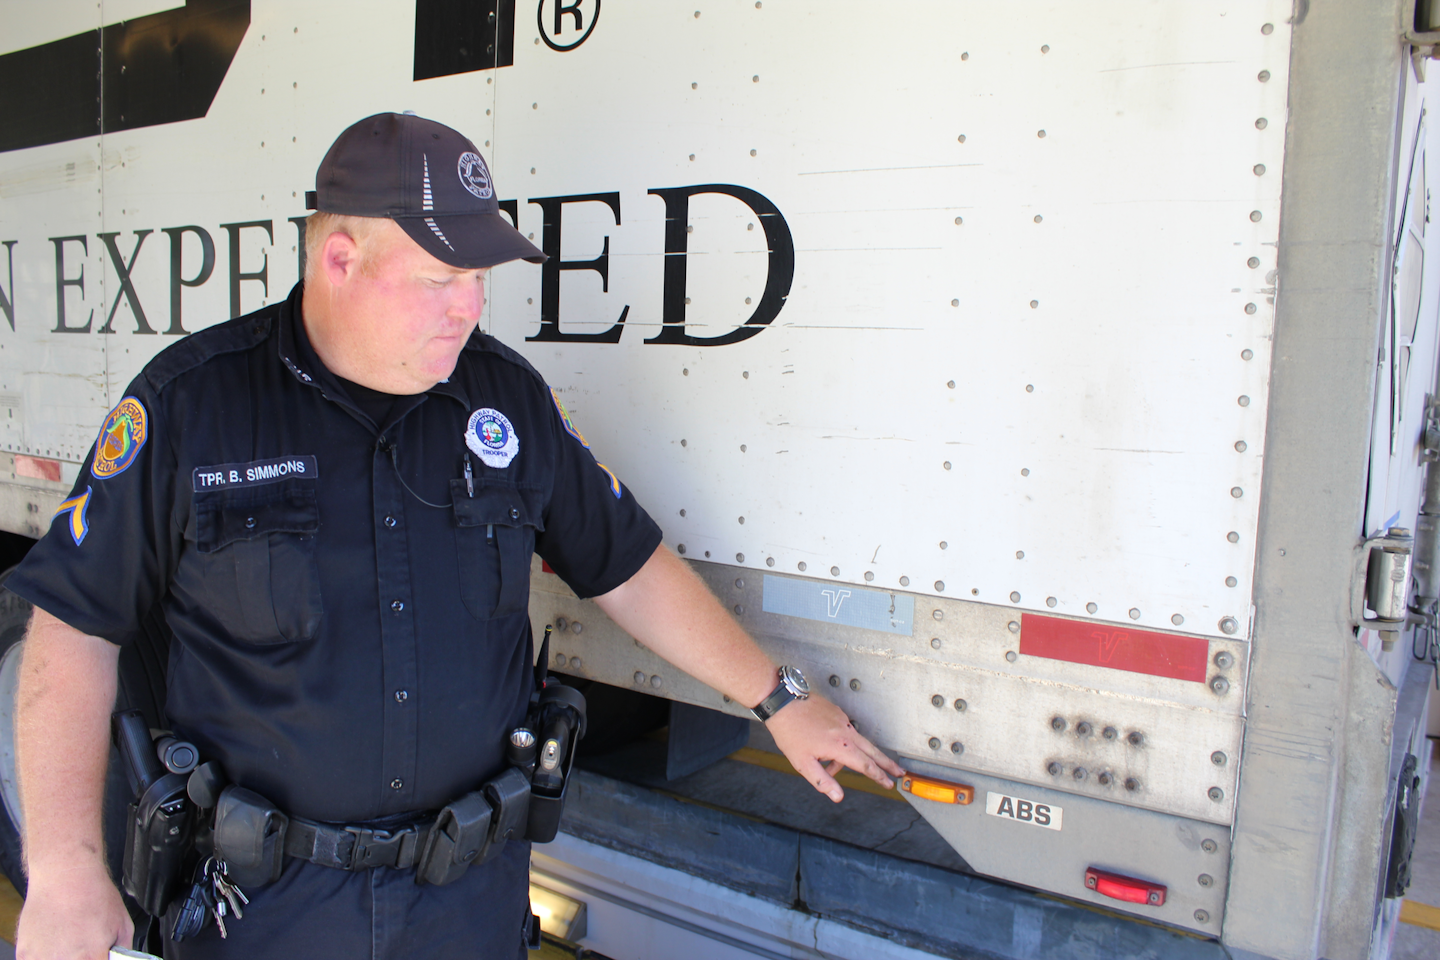 Even the smallest light failure can prompt inspectors to look for even bigger violations according to Kerri Wirachowsky, director of the Roadside Inspection Program at the Commercial Vehicle Safety Alliance.